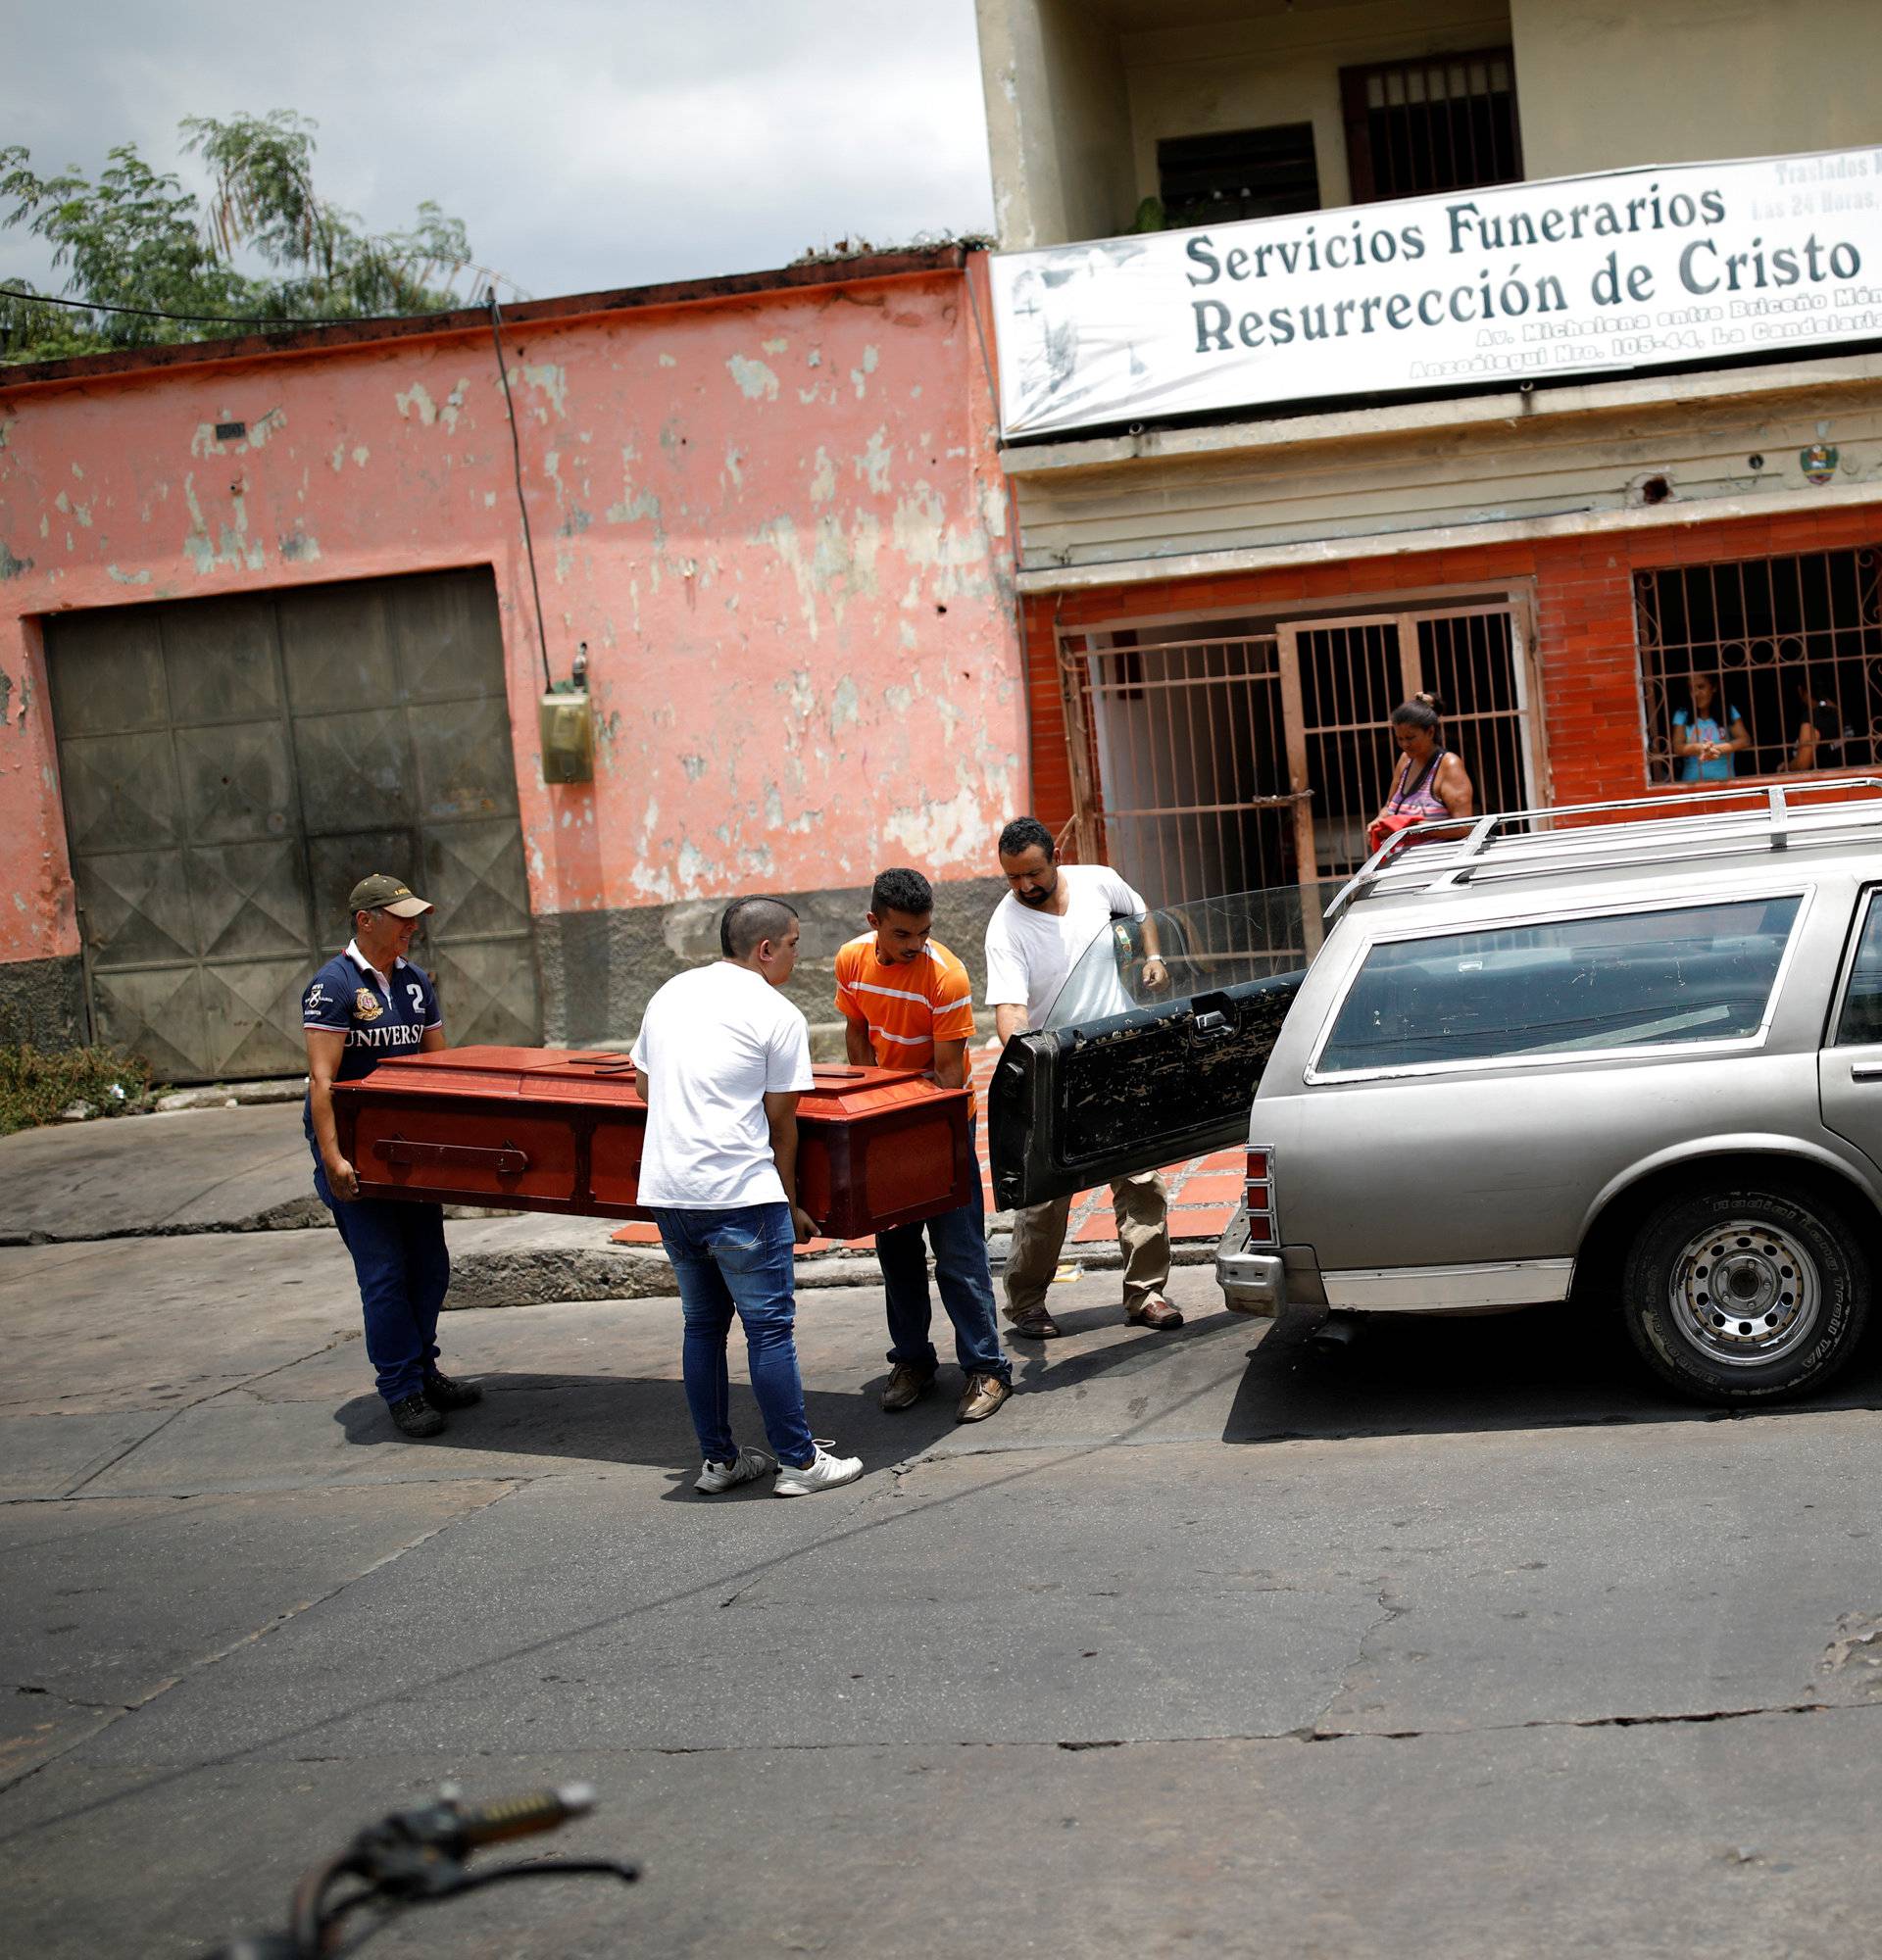 Men carry the coffin of Javier Rivas, one of the inmates who died during a riot and fire in the cells of the General Command of the Carabobo Police, at a funeral home in Valencia